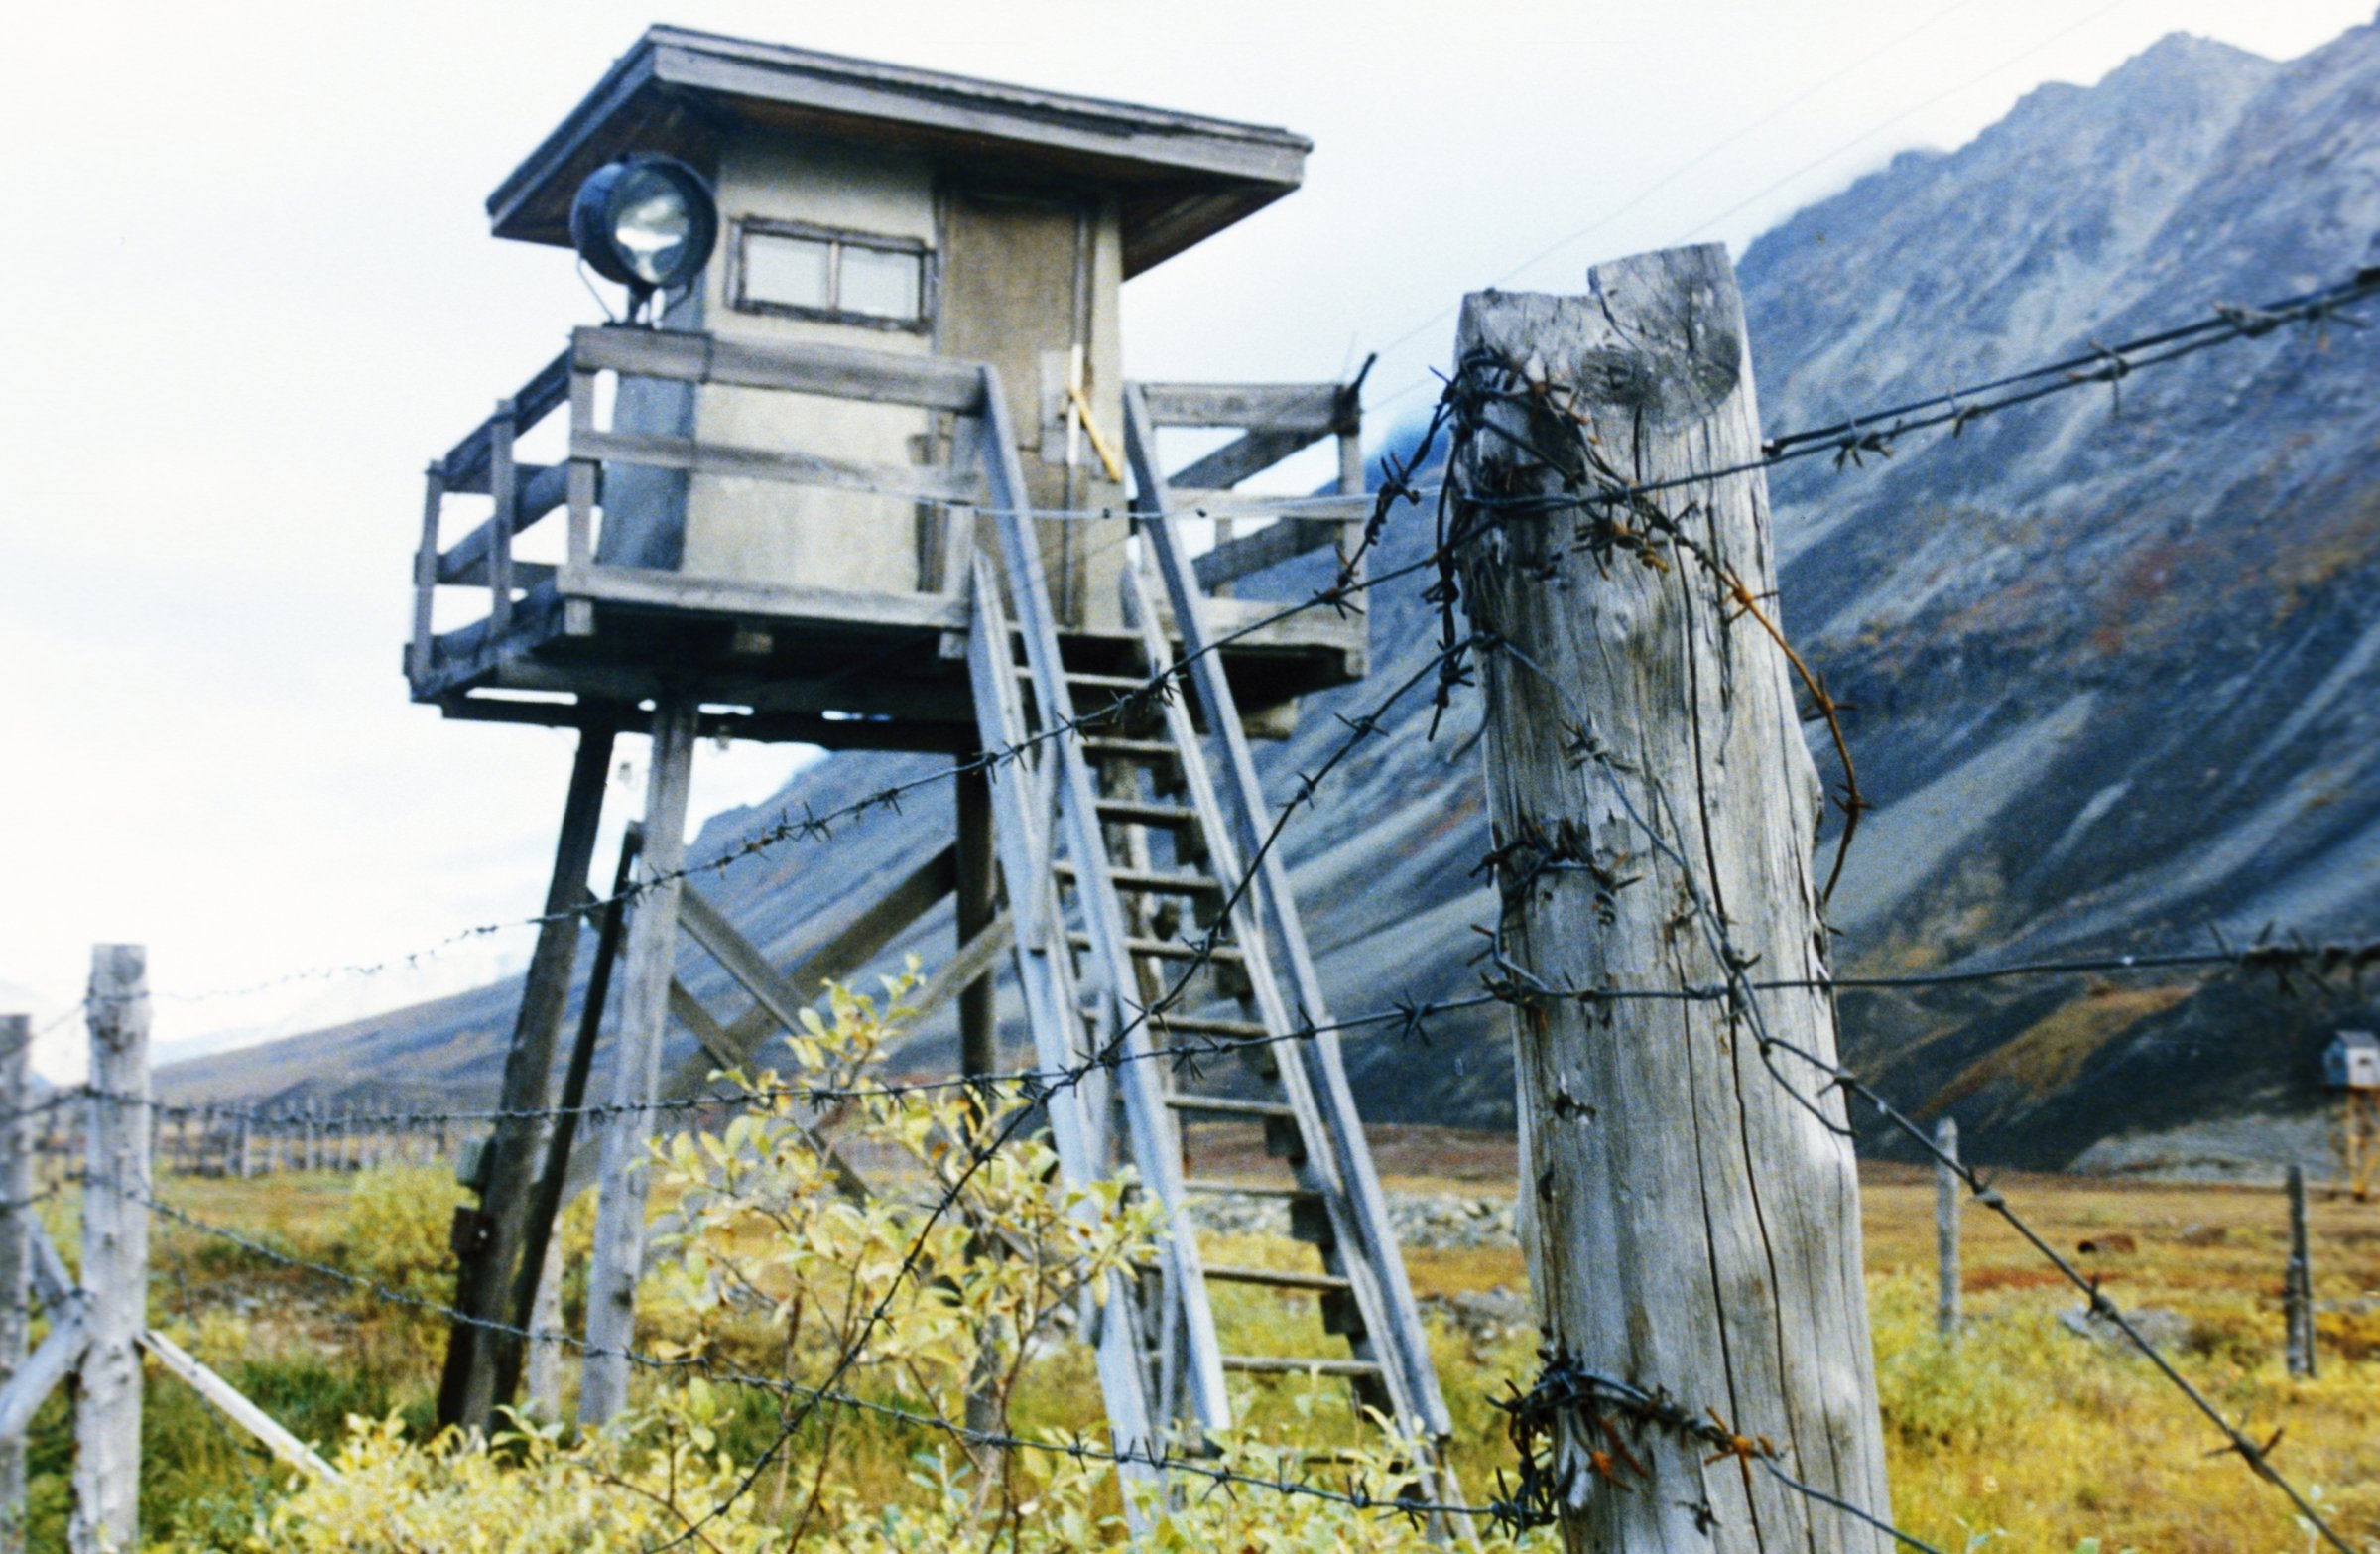 The remains of a stalin-era gulag in chukotka, russian far east.